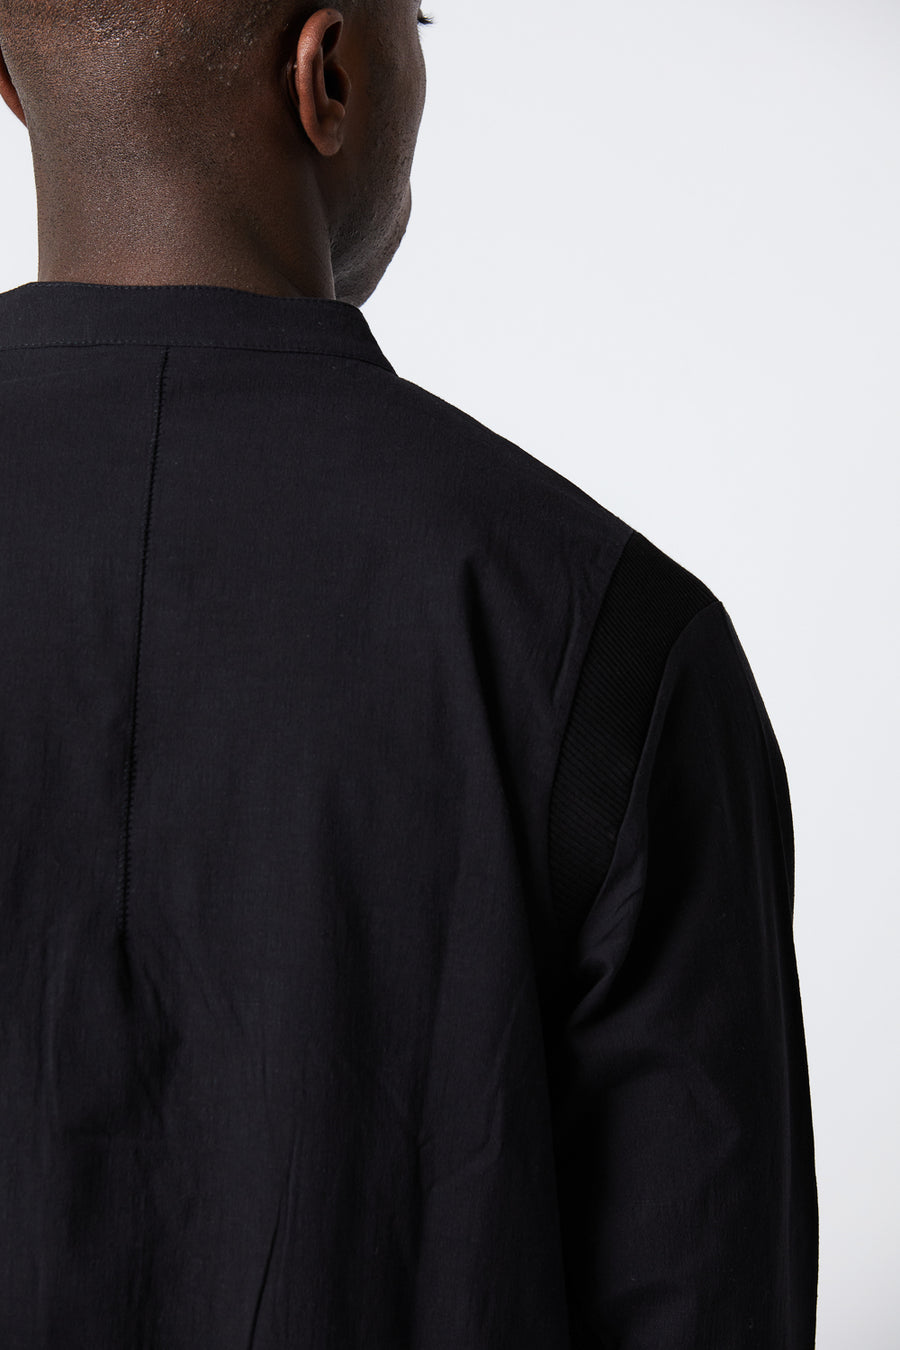 Buy the Thom Krom M H 130 Shirt in Black at Intro. Spend £50 for free UK delivery. Official stockists. We ship worldwide.